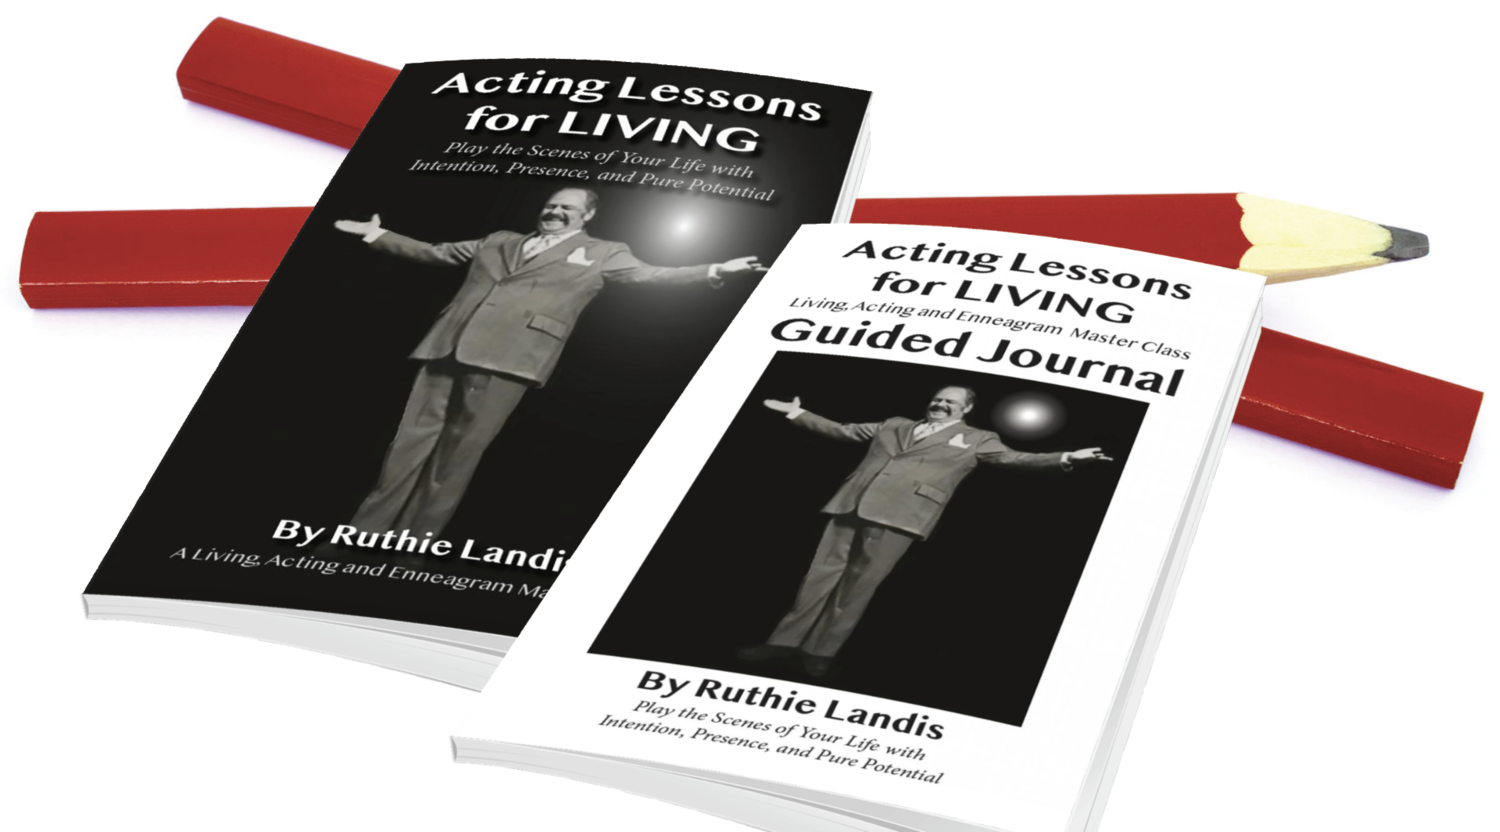 A Perfect Pairing: Acting Lessons for Living AND the Guided Journal